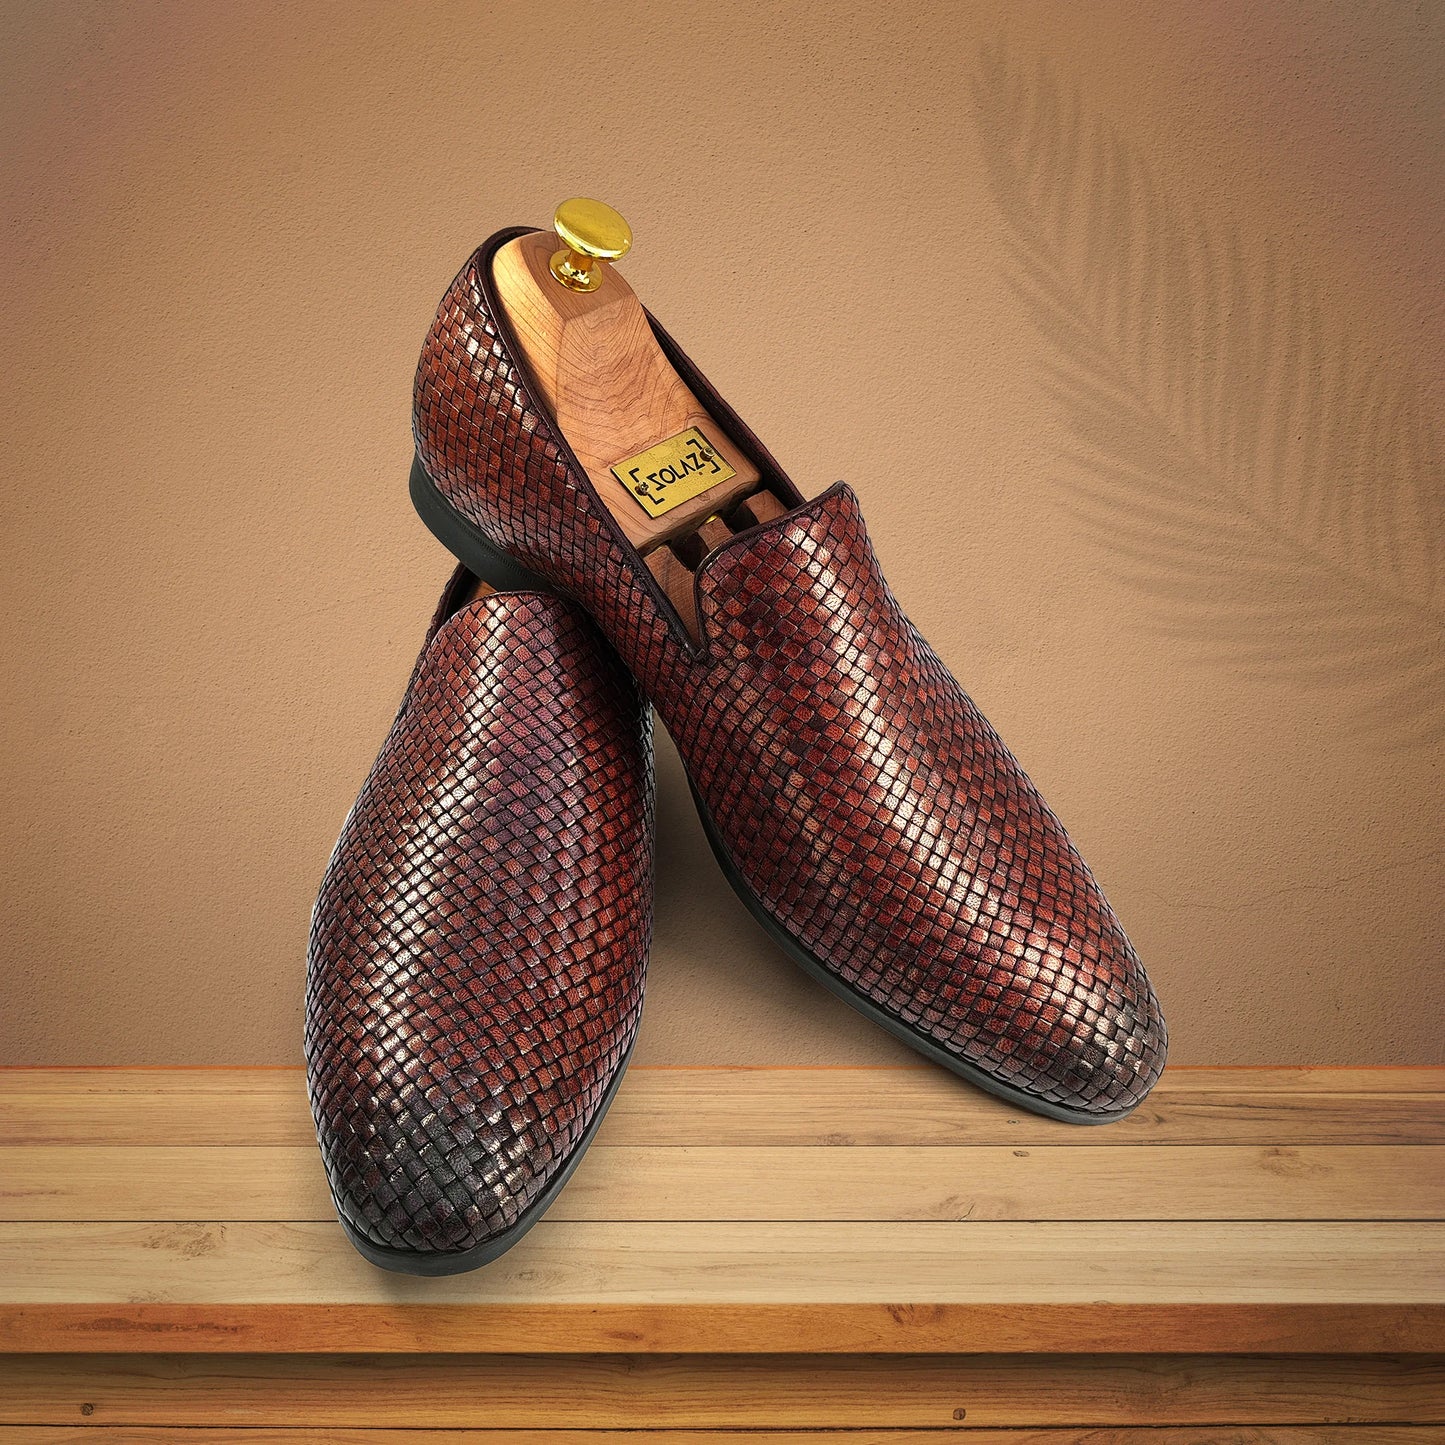 Solaz Brown Woven Loafer Slipons Shoes Made of Real Leather for Men